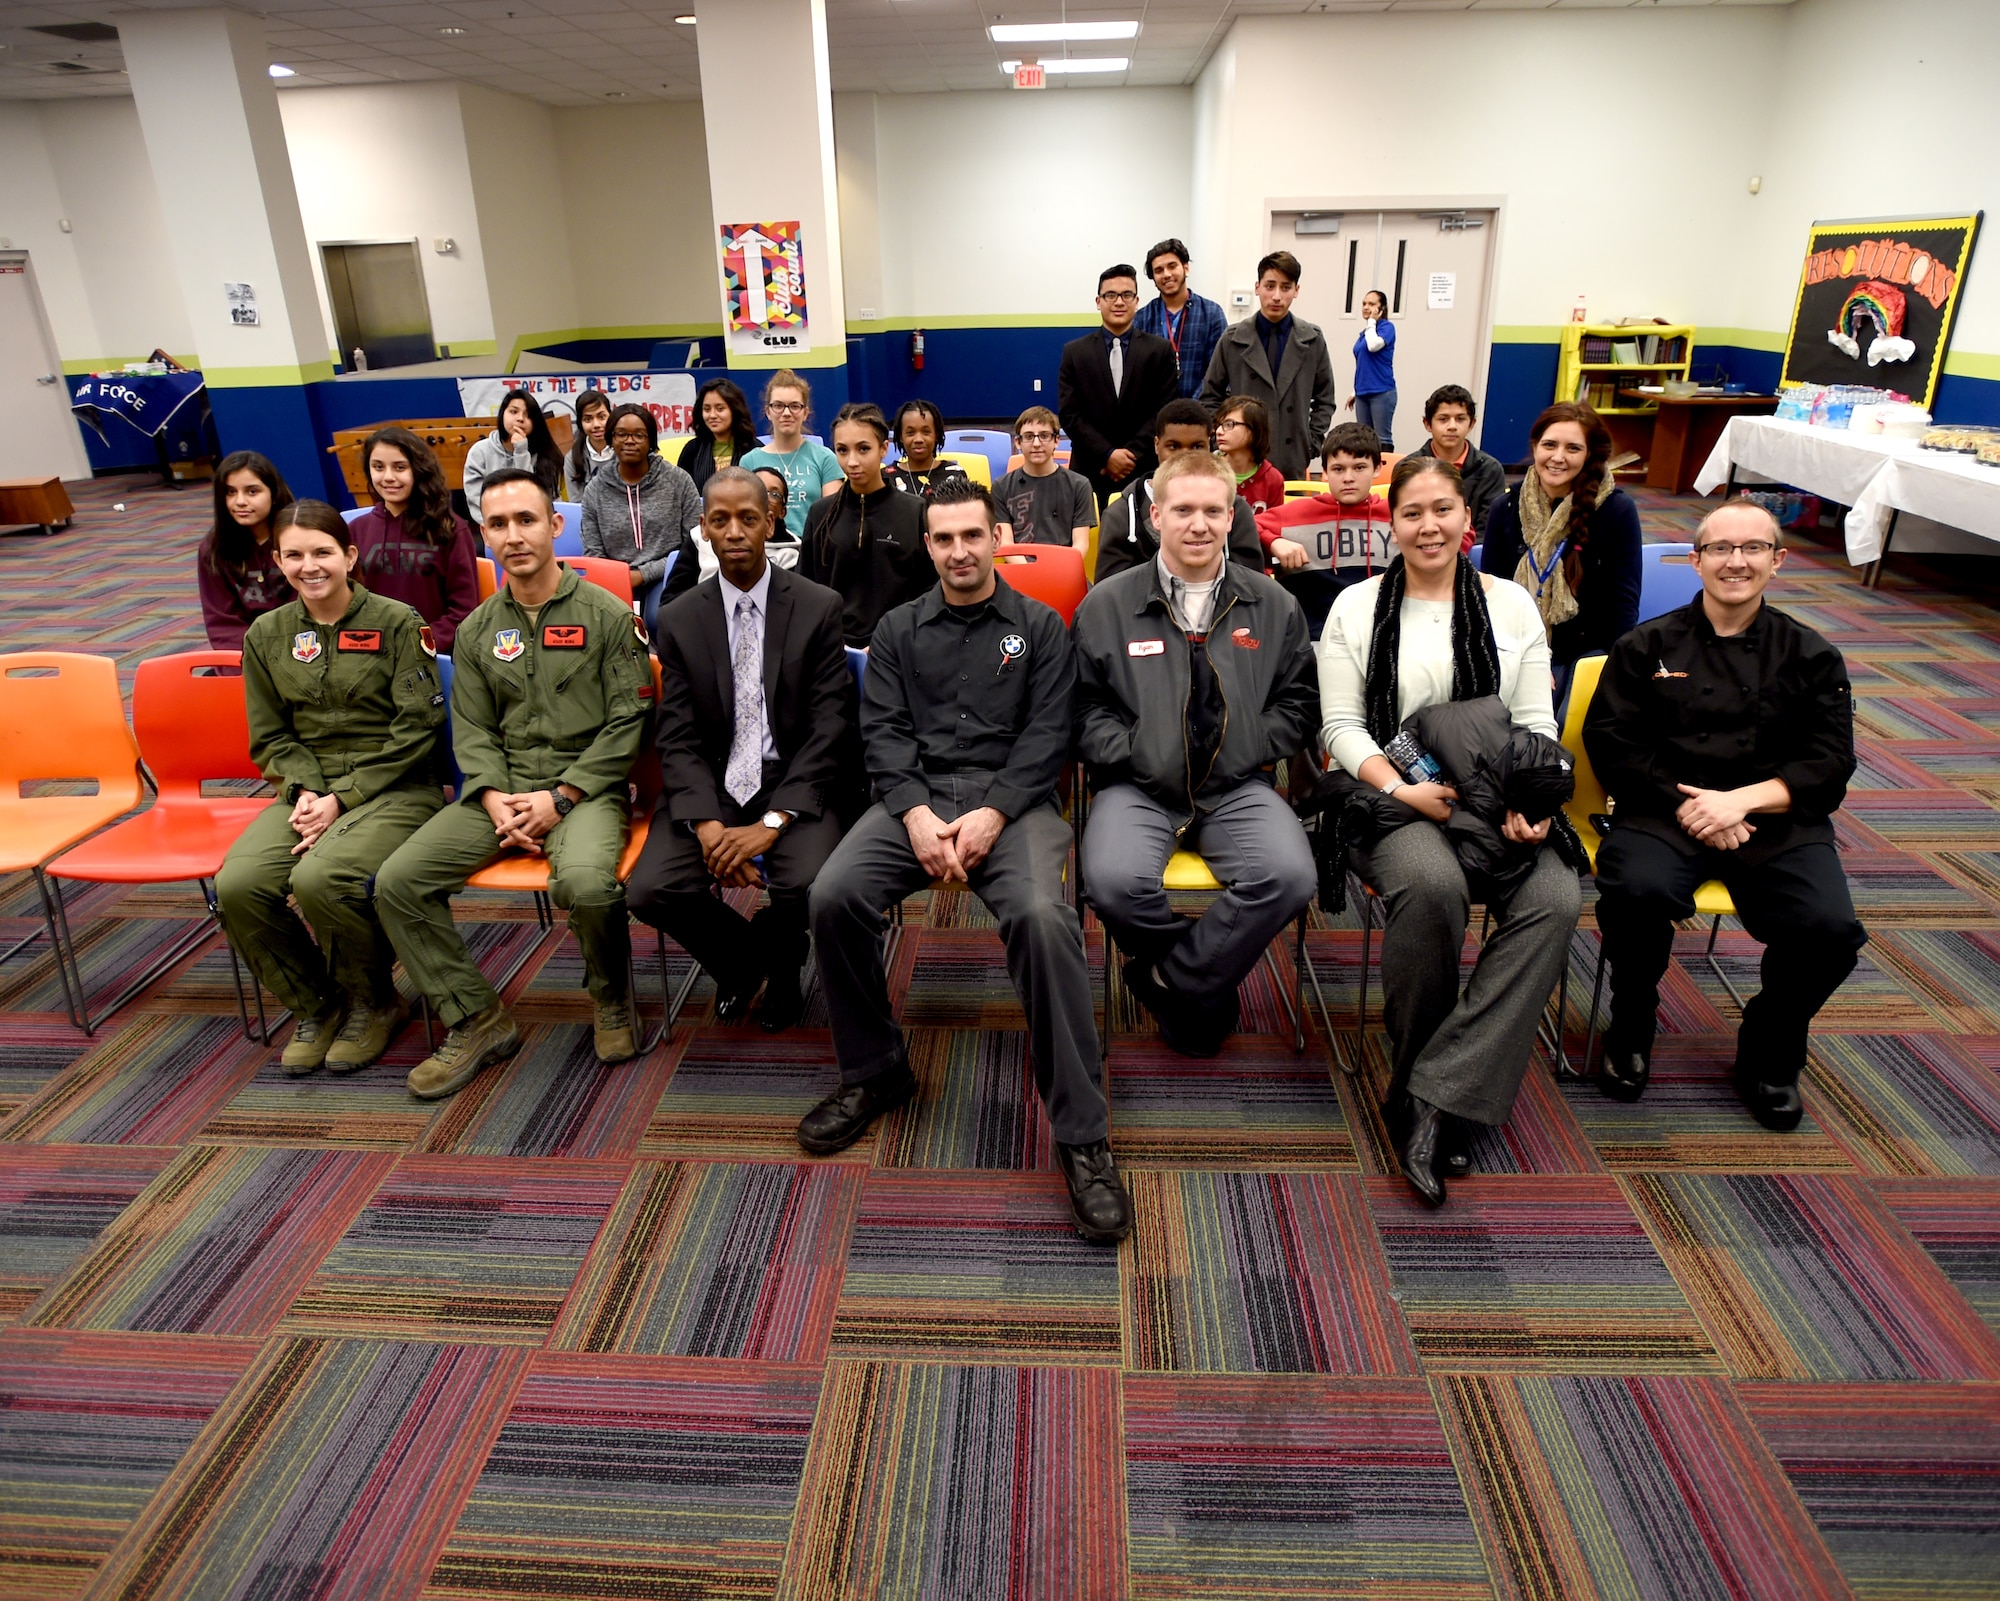 Capt. Angela, 432nd Wing/ 432 Expeditionary Wing, left, and Tech. Sgt. Gabriel, 42nd W/ 432 AEW, pose with other guest speakers Jan. 7, 2016 during Career Day at Boys and Girls Club in Las Vegas, Nevada Jan. 7, 2016. Gabriel and Angela spoke to the youth members about their jobs and answered important questions about the Air Force mission. The two passed out 432nd Wing patches as memorabilia of their visit and presented a video explaining the importance of remotely piloted aircraft in the war on terrorism. (U.S. Air Force photo by Airman 1st Class Kristan Campbell/released).